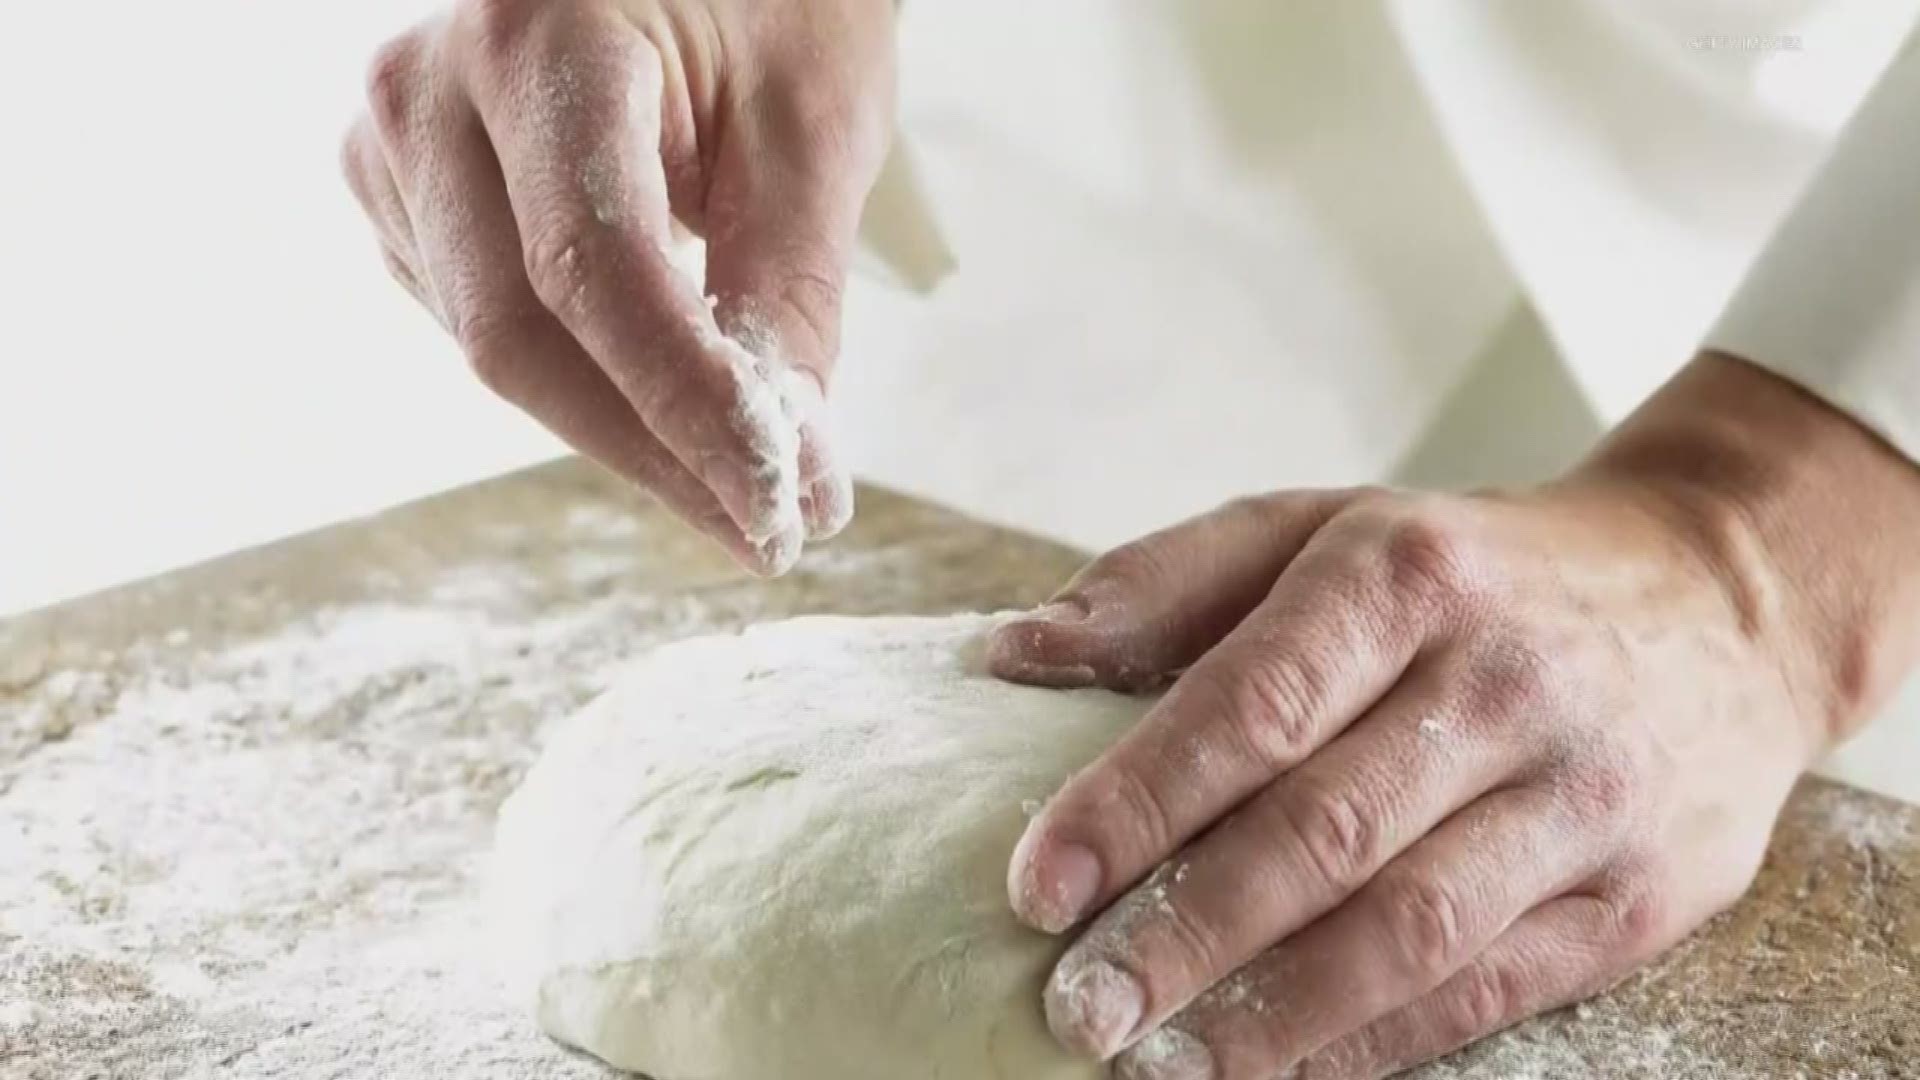 At home for awhile? Try these breadmaking tips from a restaurant chef